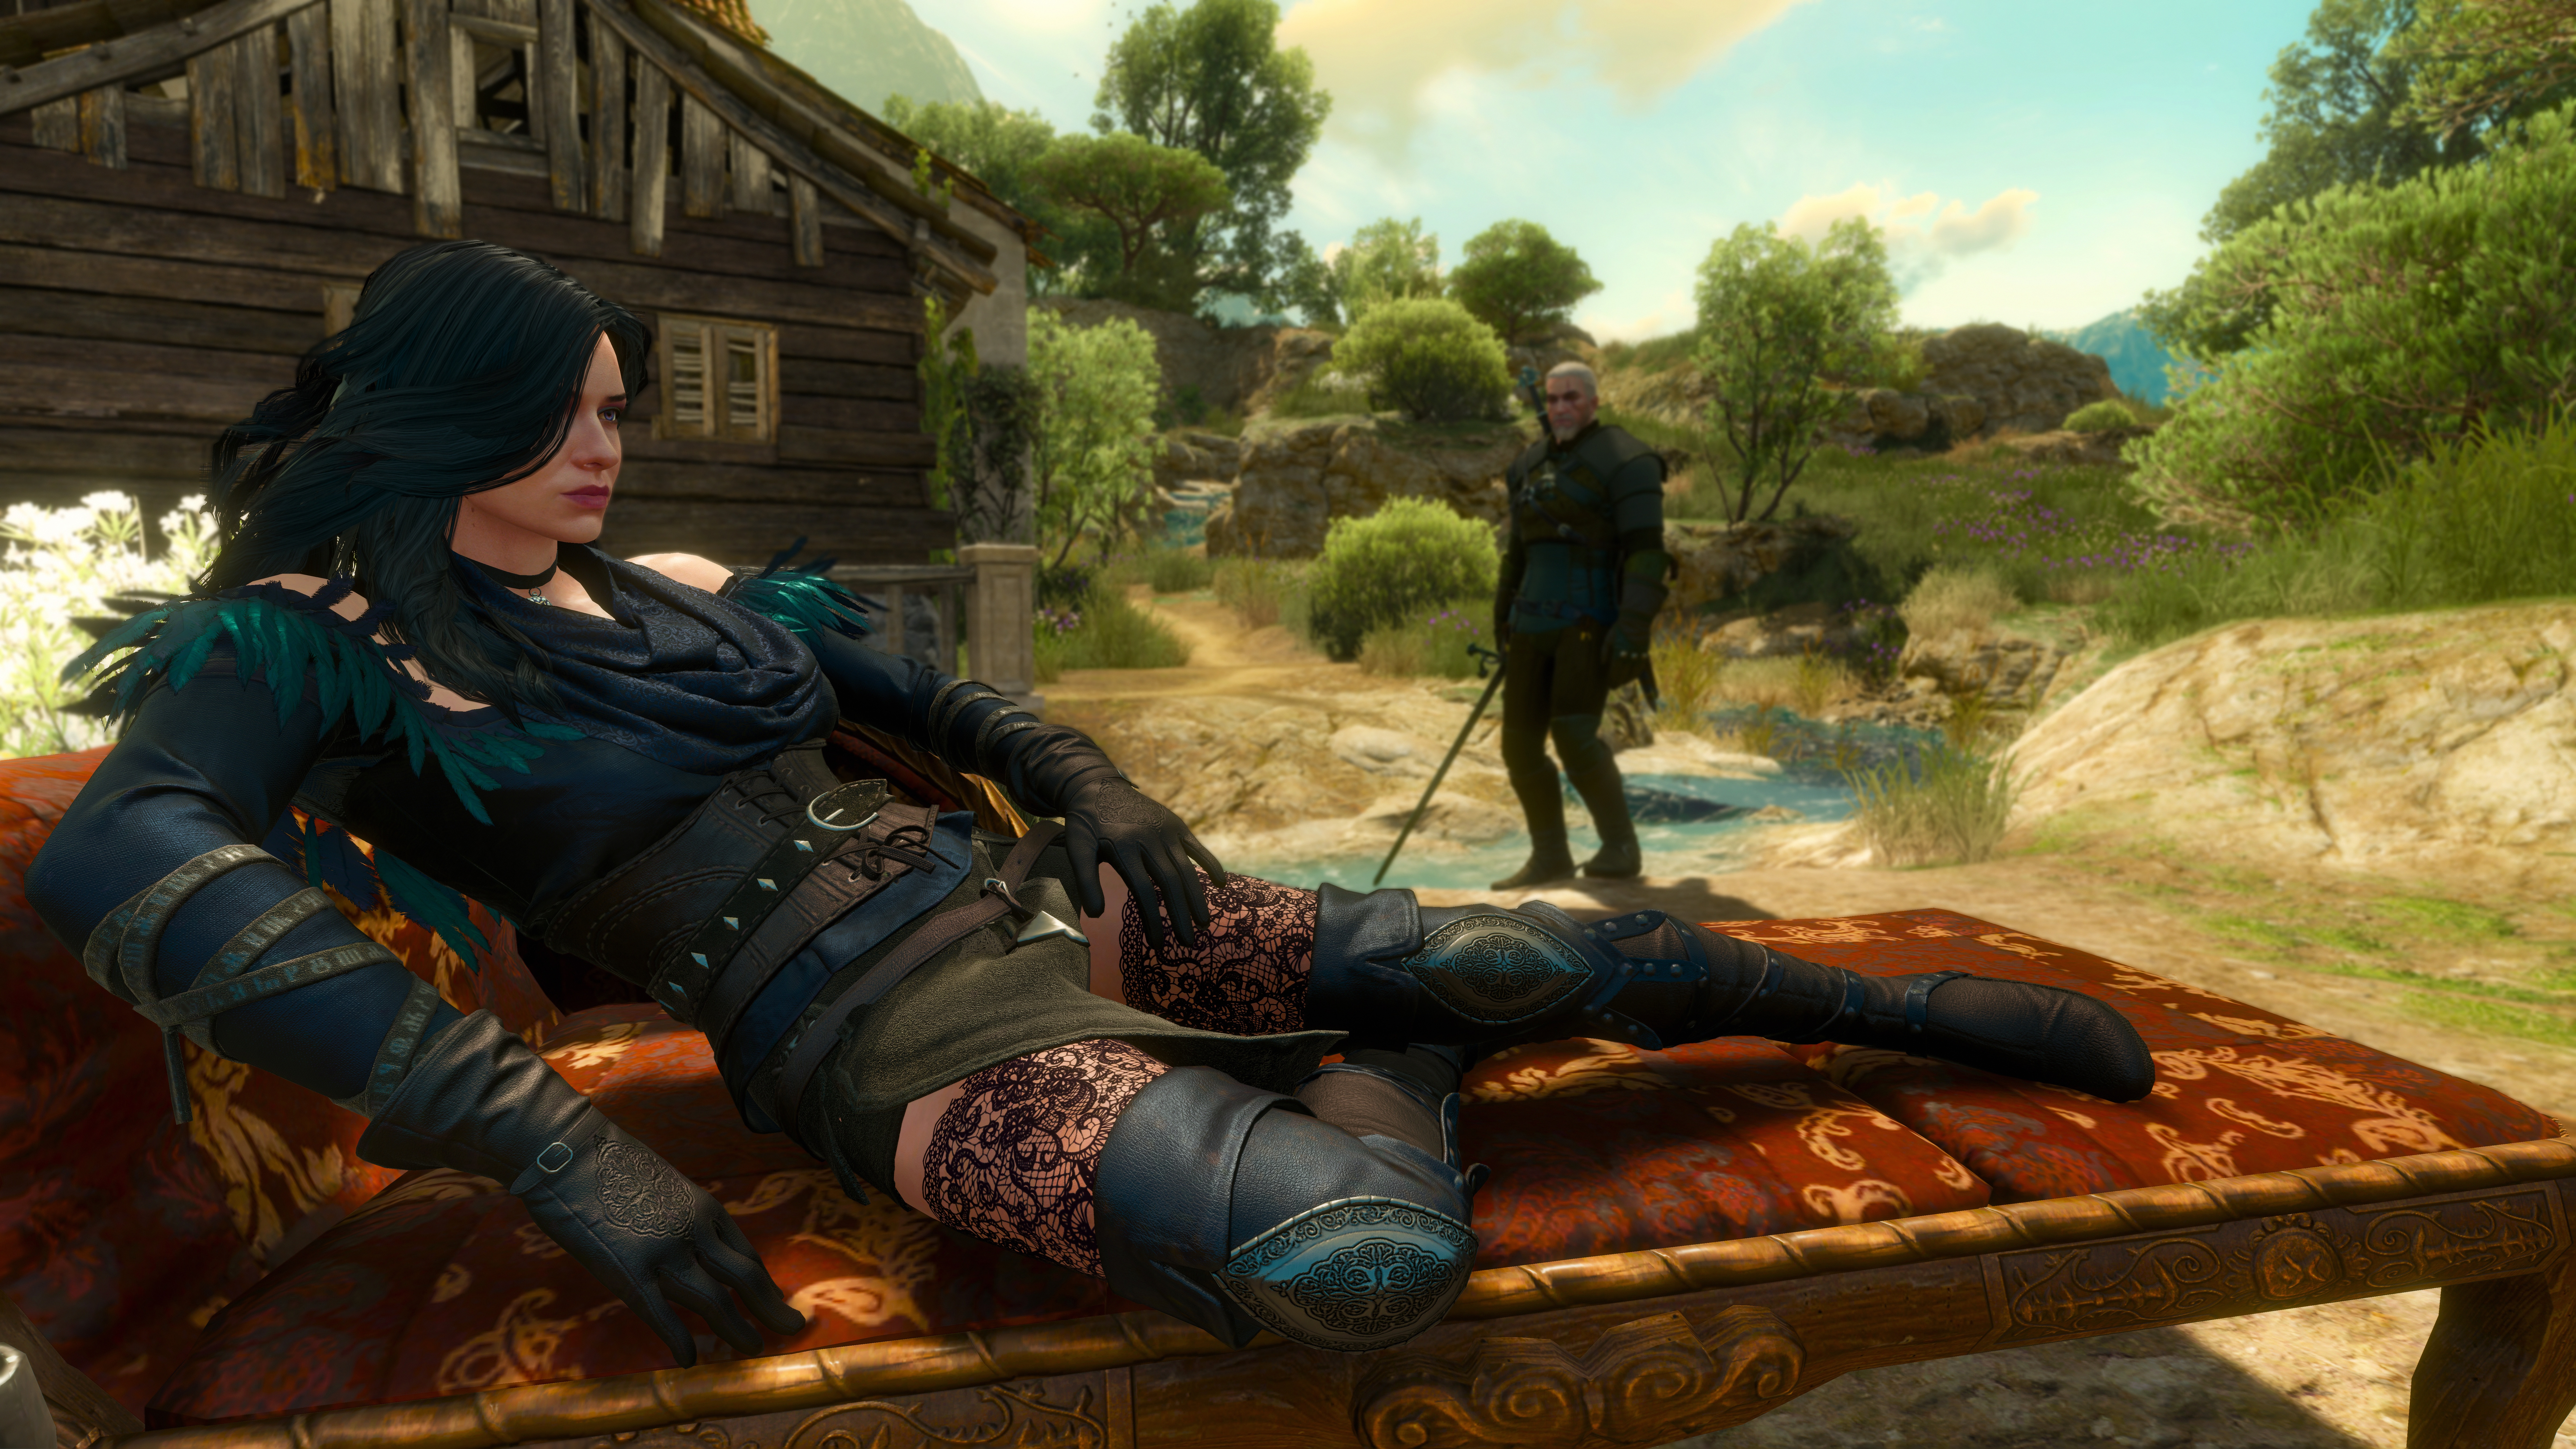 General 9600x5400 video games The Witcher 3: Wild Hunt The Witcher Geralt of Rivia Yennefer of Vengerberg The Witcher 3: Wild Hunt - Blood and Wine video game characters book characters CD Projekt RED